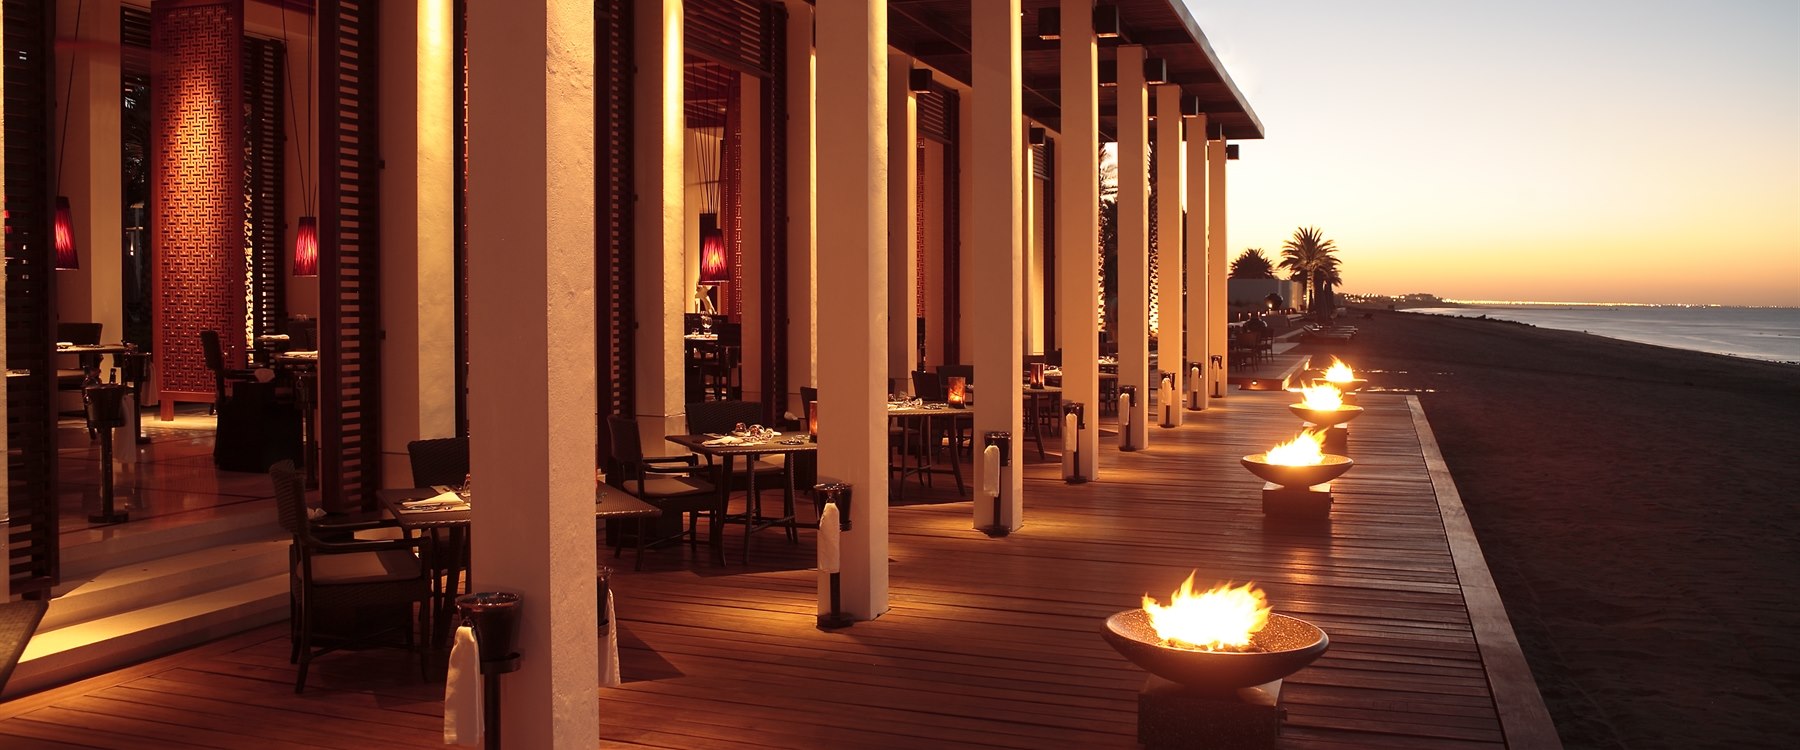 The beach restaurant at The Chedi Muscat, Oman